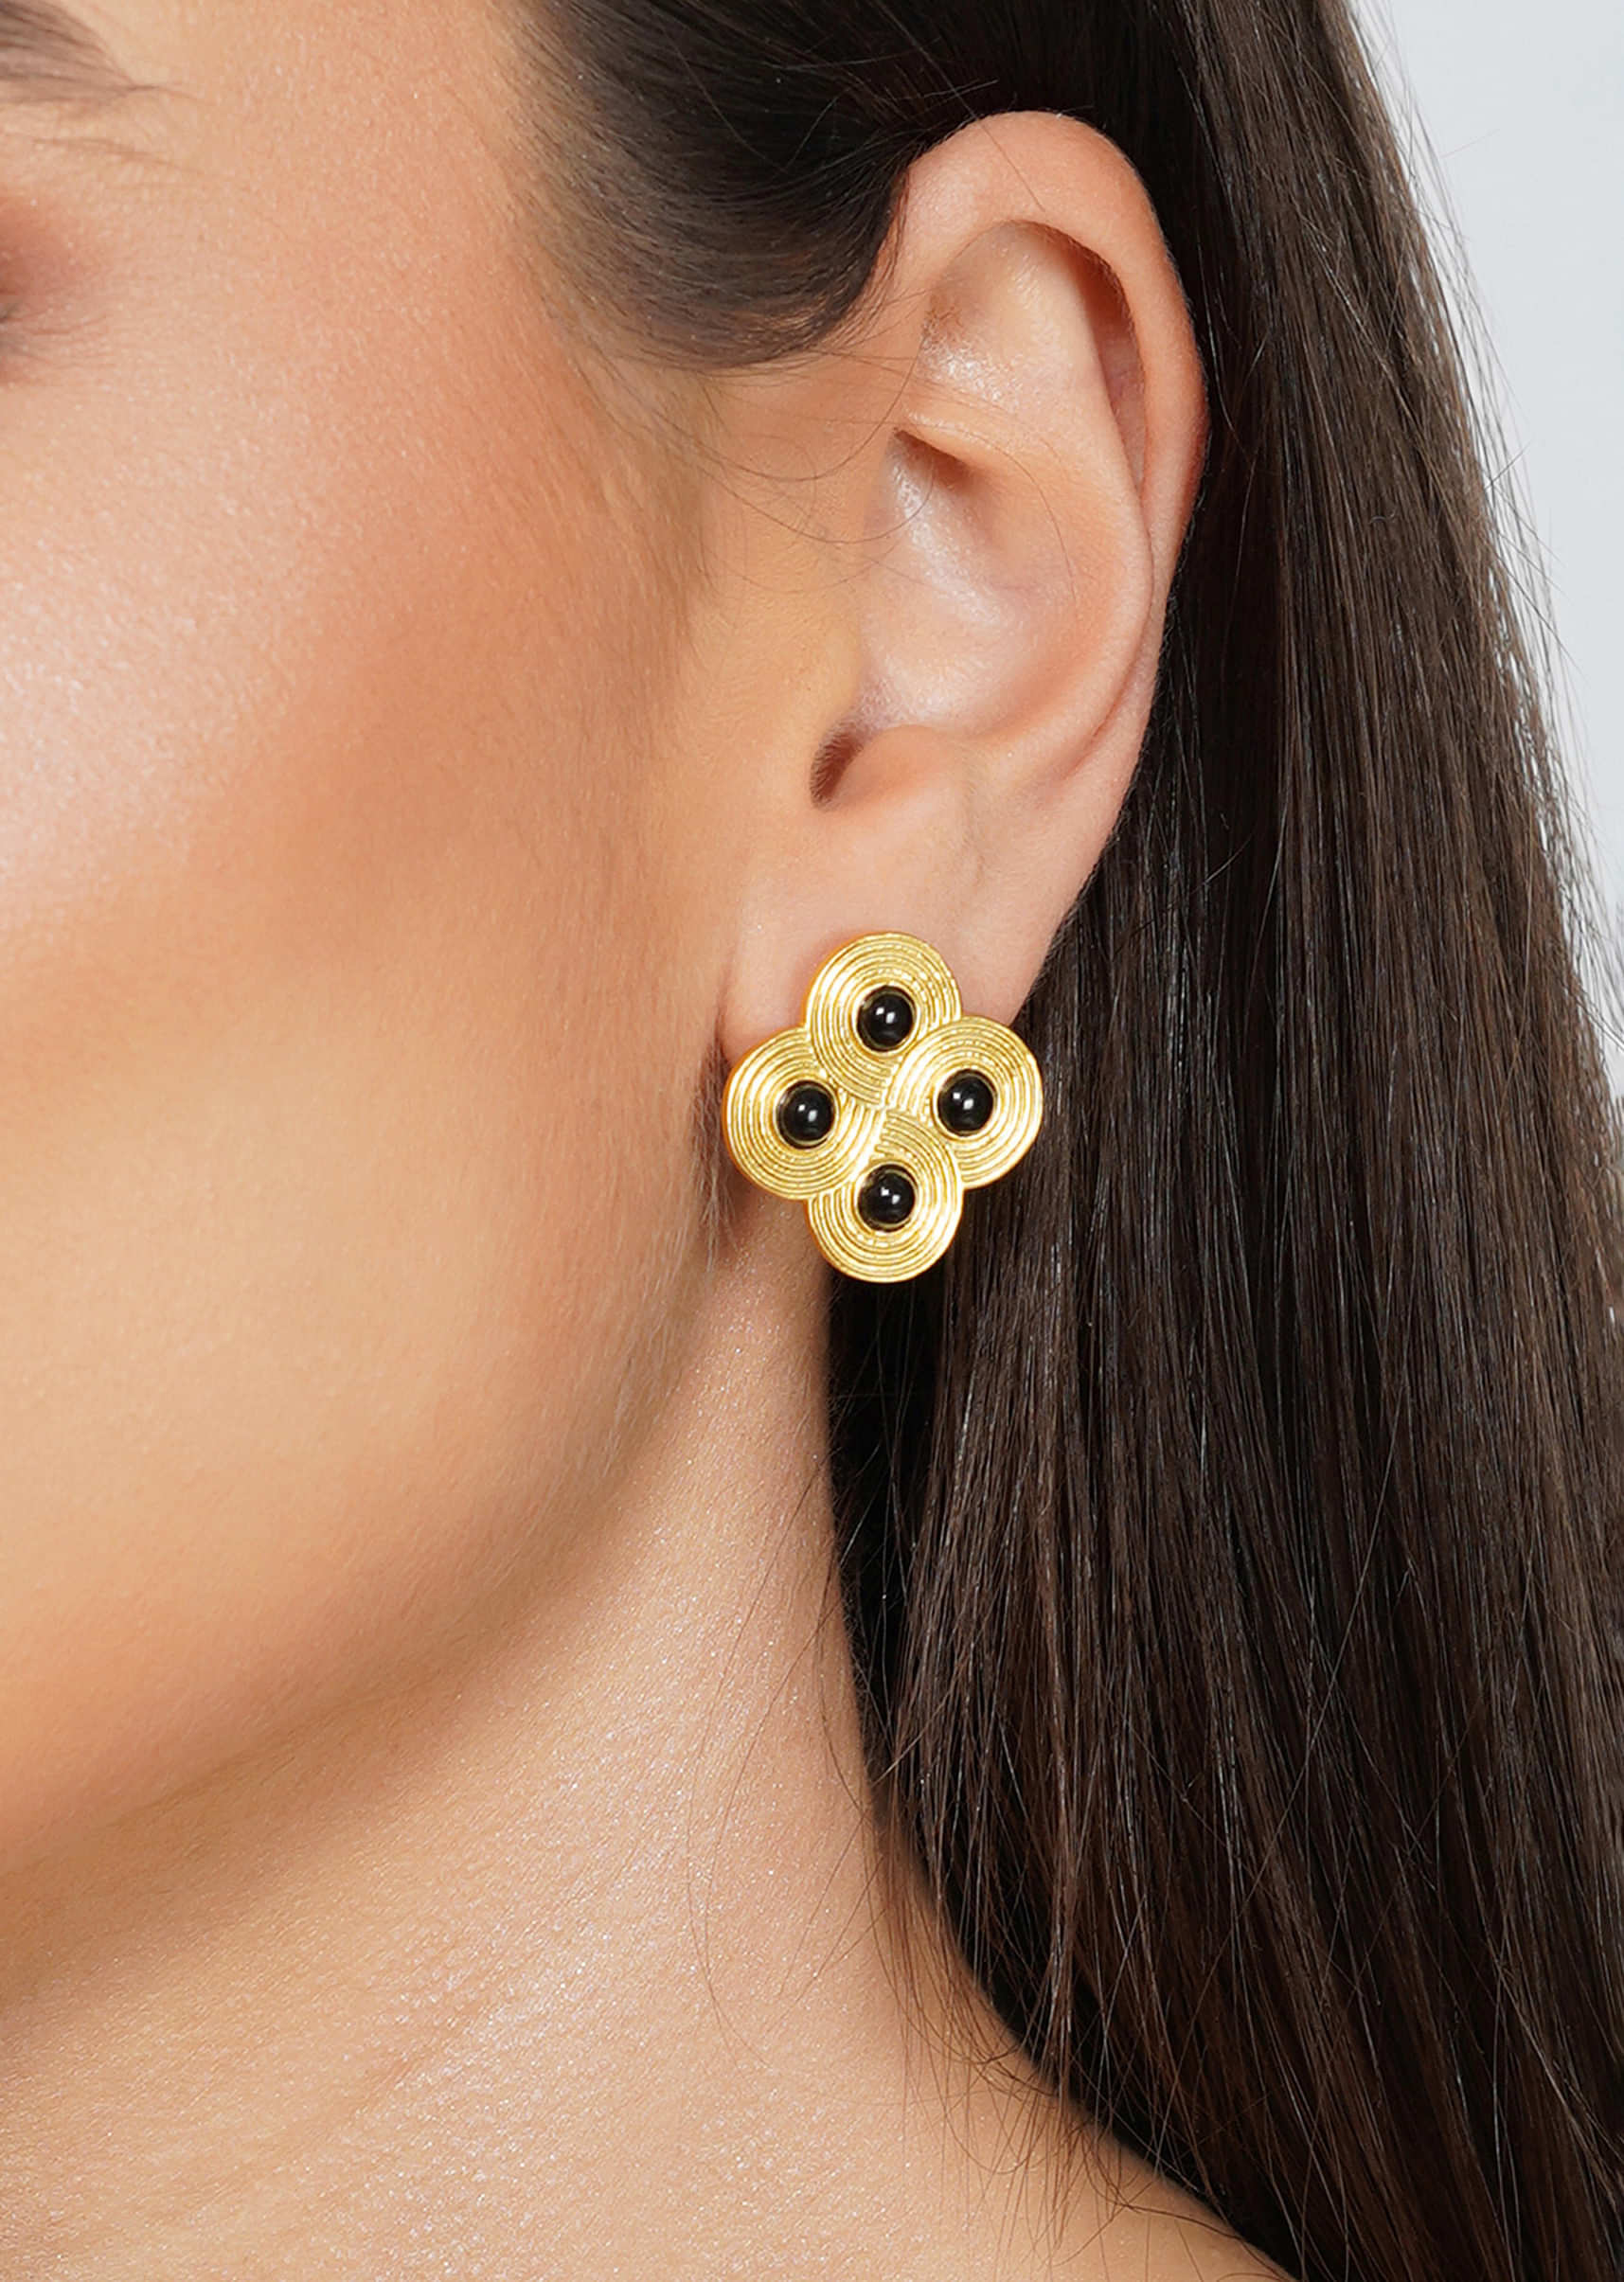 Gold Plated Stud Earrings Embellished With Black Onyx Stones